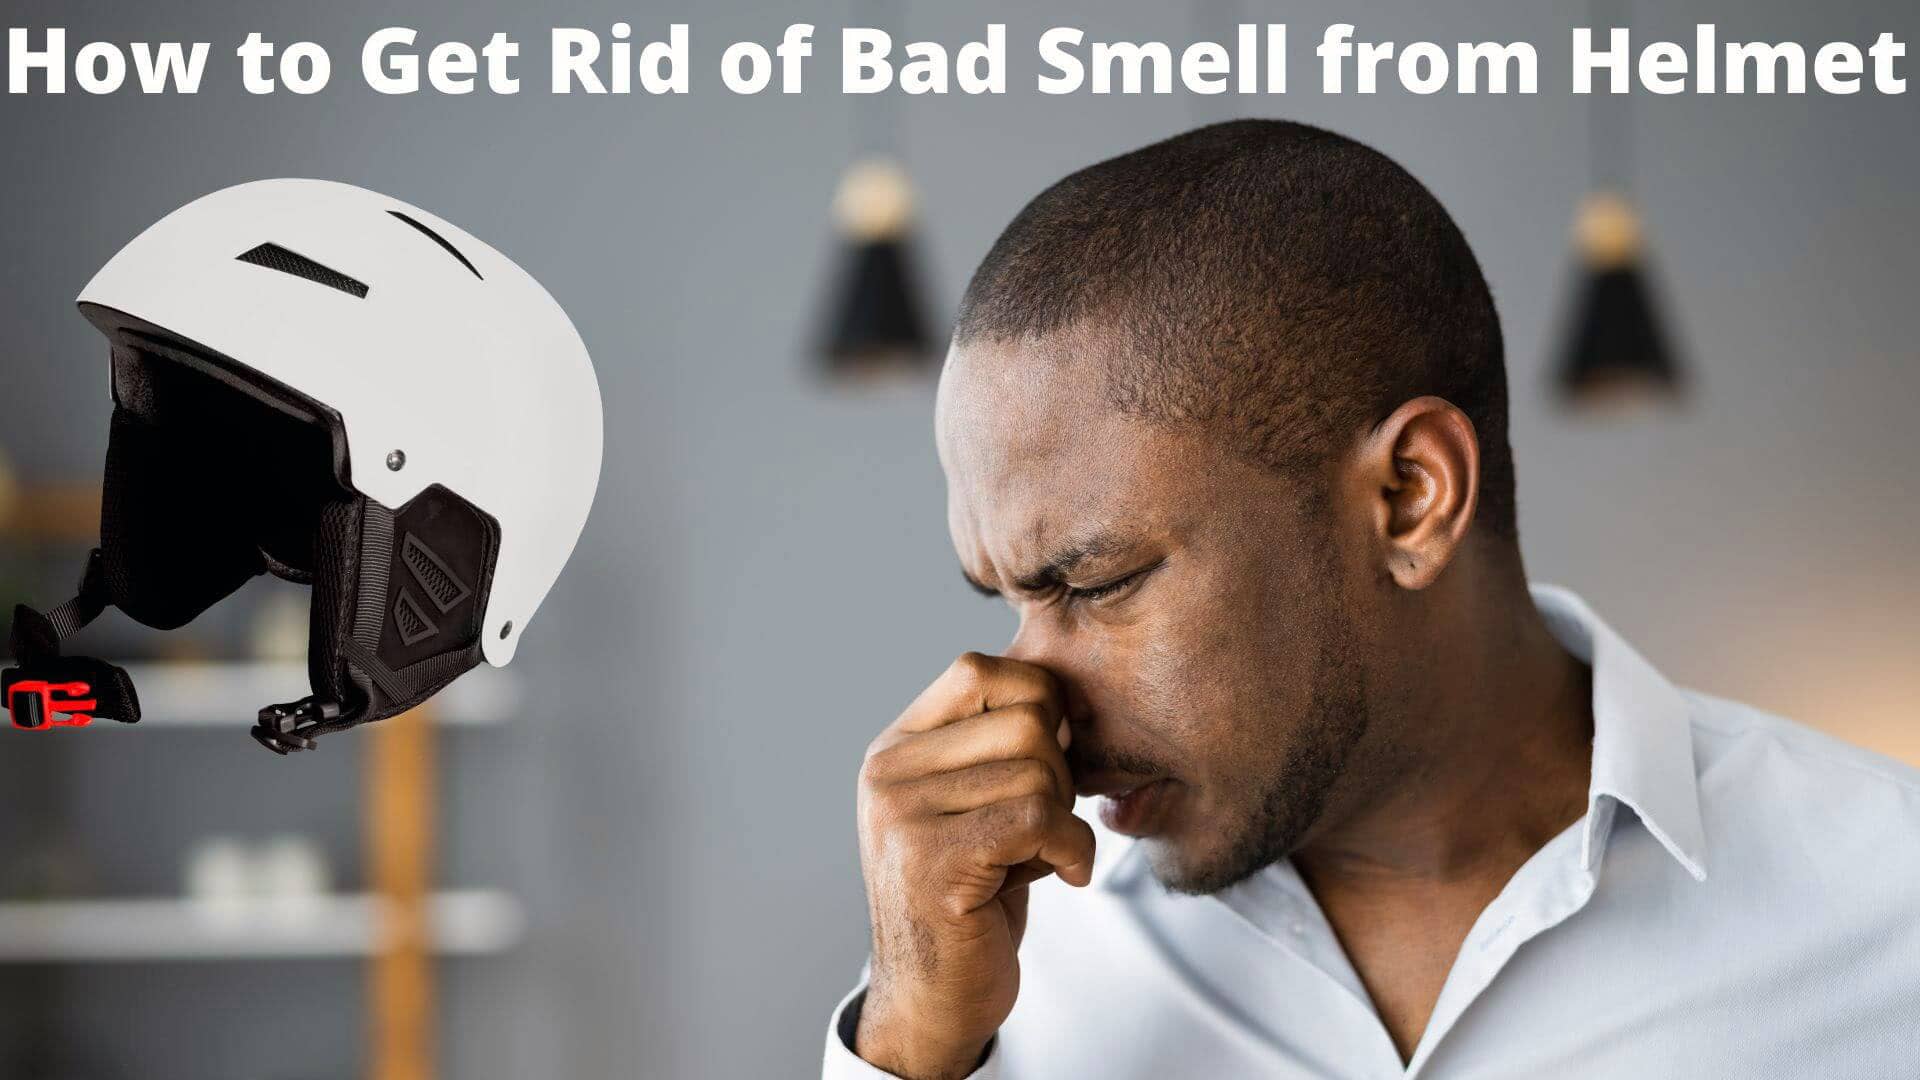 How to Get Rid of Bad Smell from Helmet?